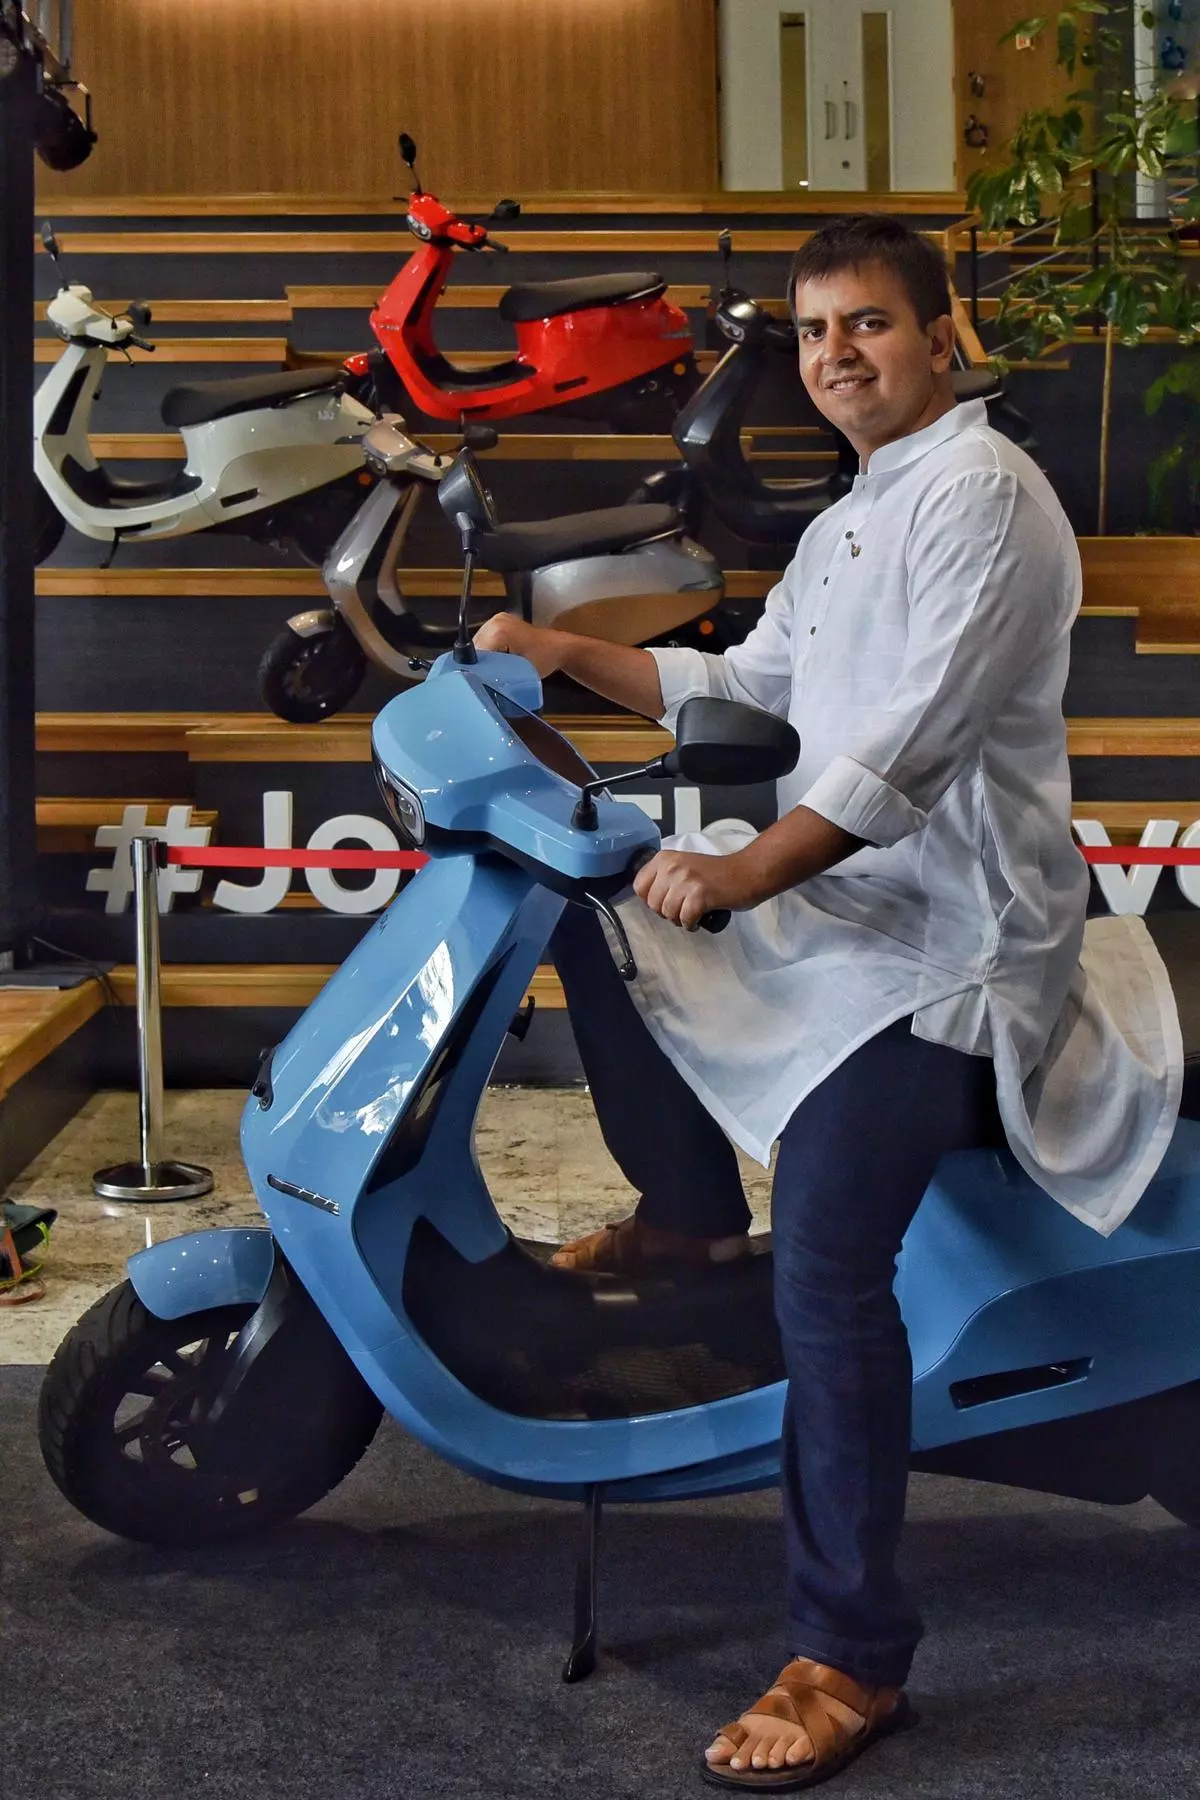 Indian entrepreneur, co-founder and CEO of Ola, Bhavish Aggarwal, poses for a photograph with the new Ola electric scooter during its launch at the Ola headquarters in Bangalore on August 15 